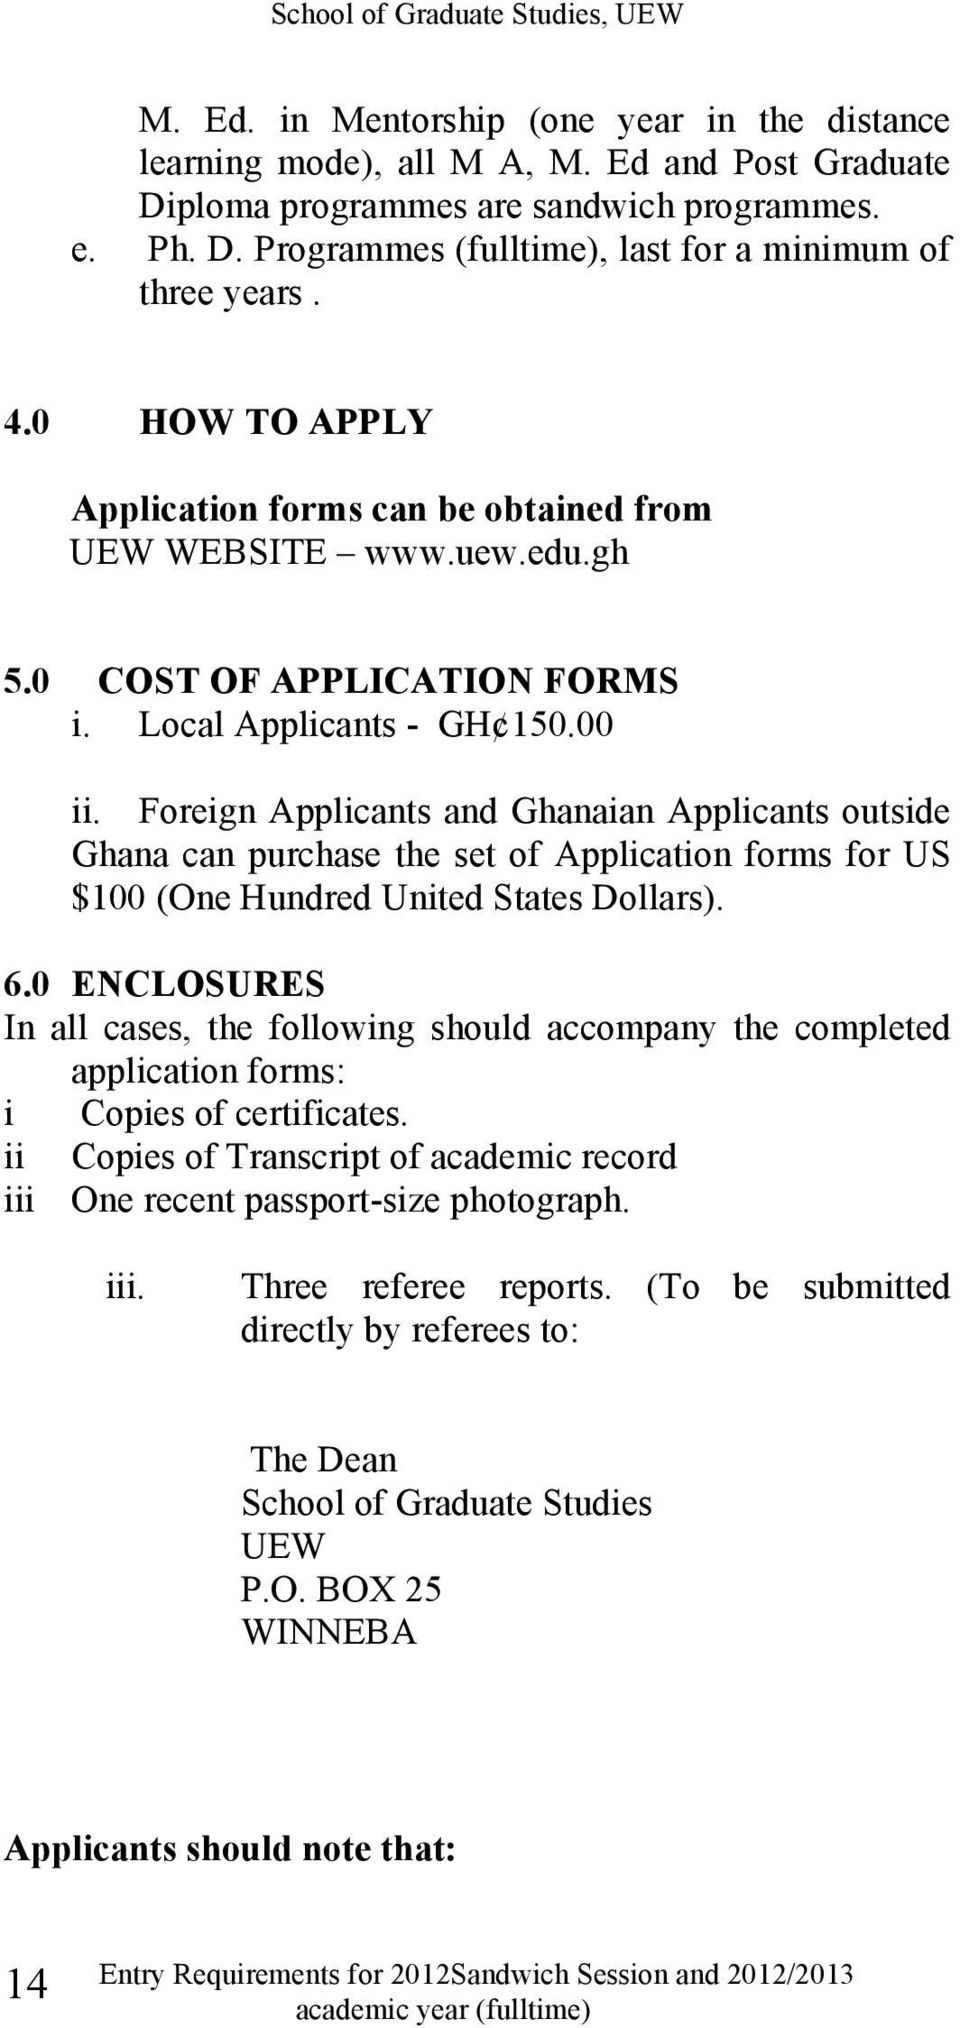 Foreign Applicants and Ghanaian Applicants outside Ghana can purchase the set of Application forms for US $100 (One Hundred United States Dollars). 6.